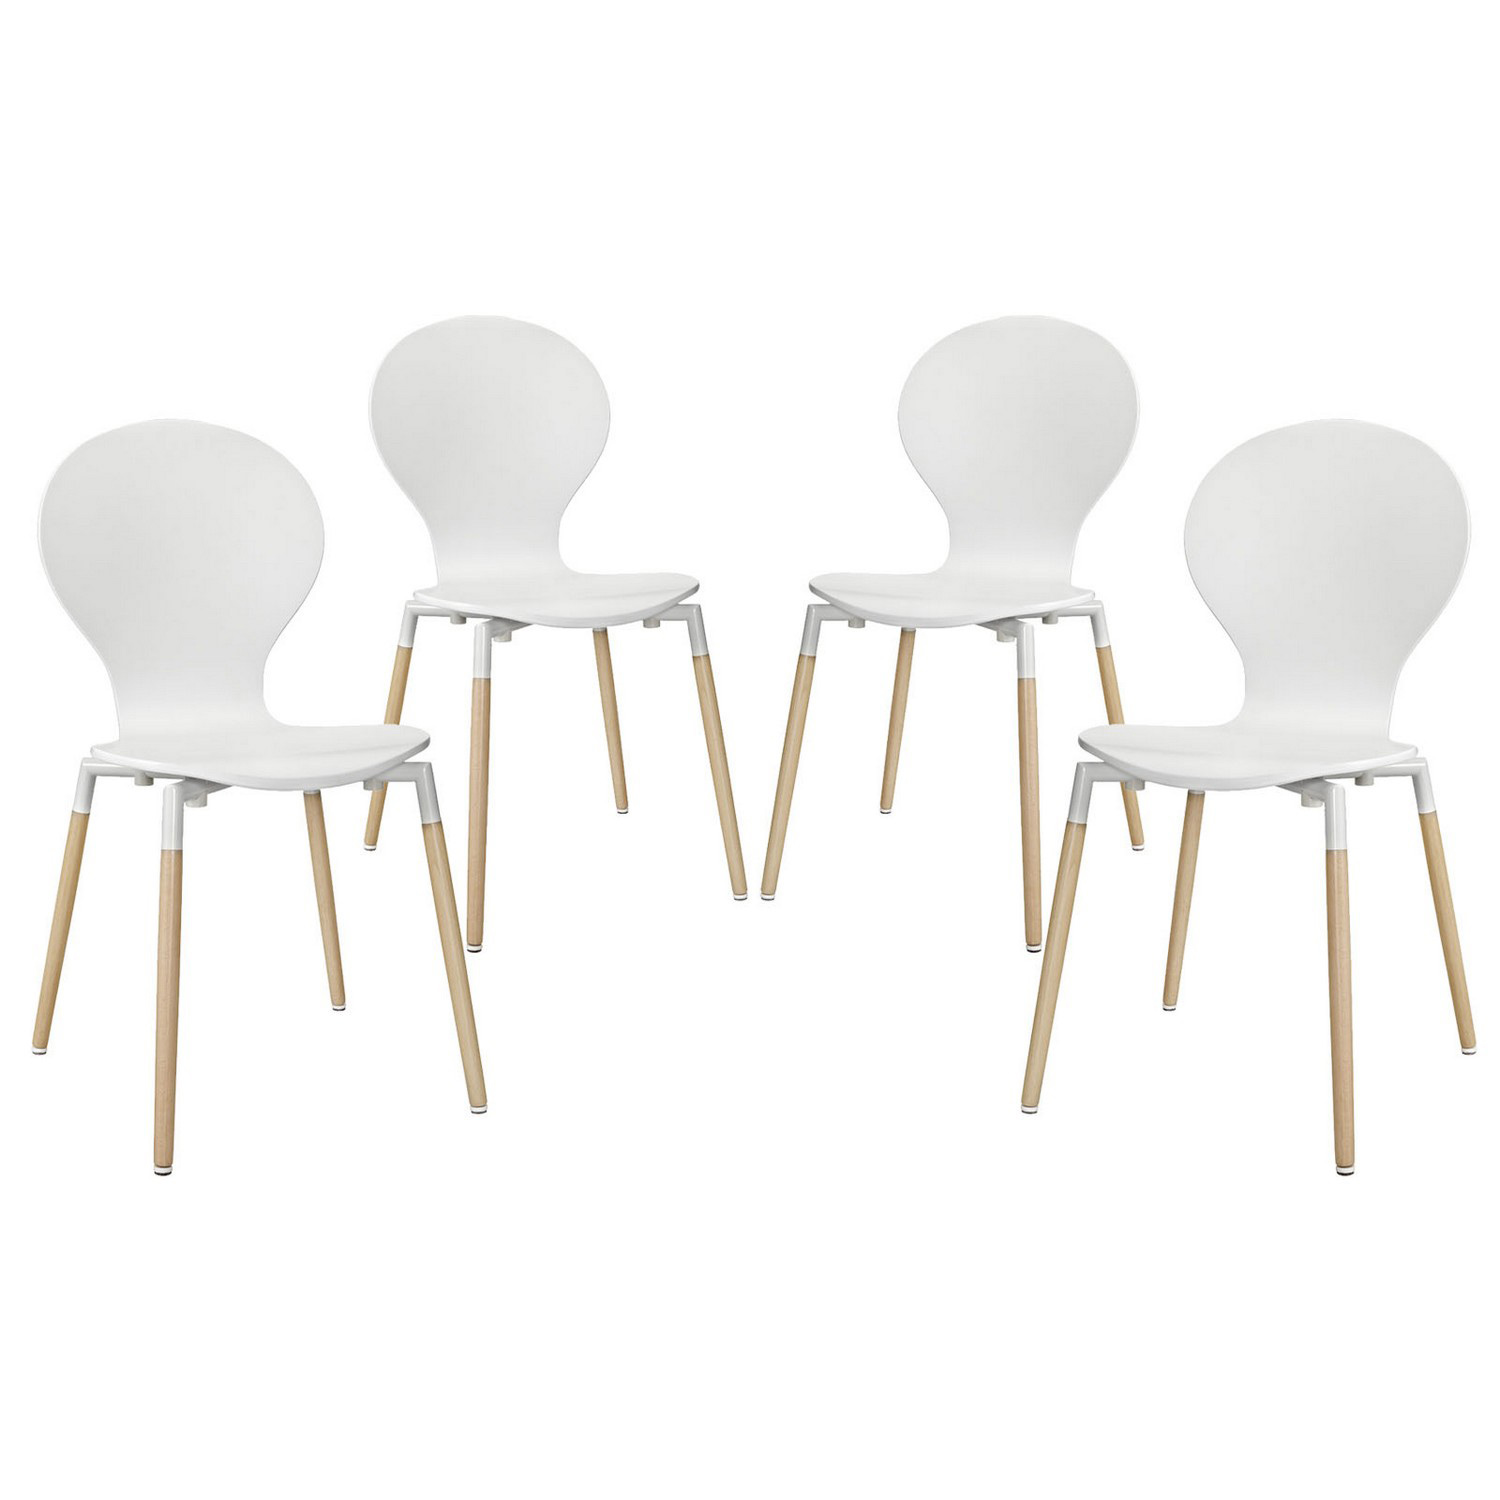 Modway Path Dining Chair Set of 4 - White